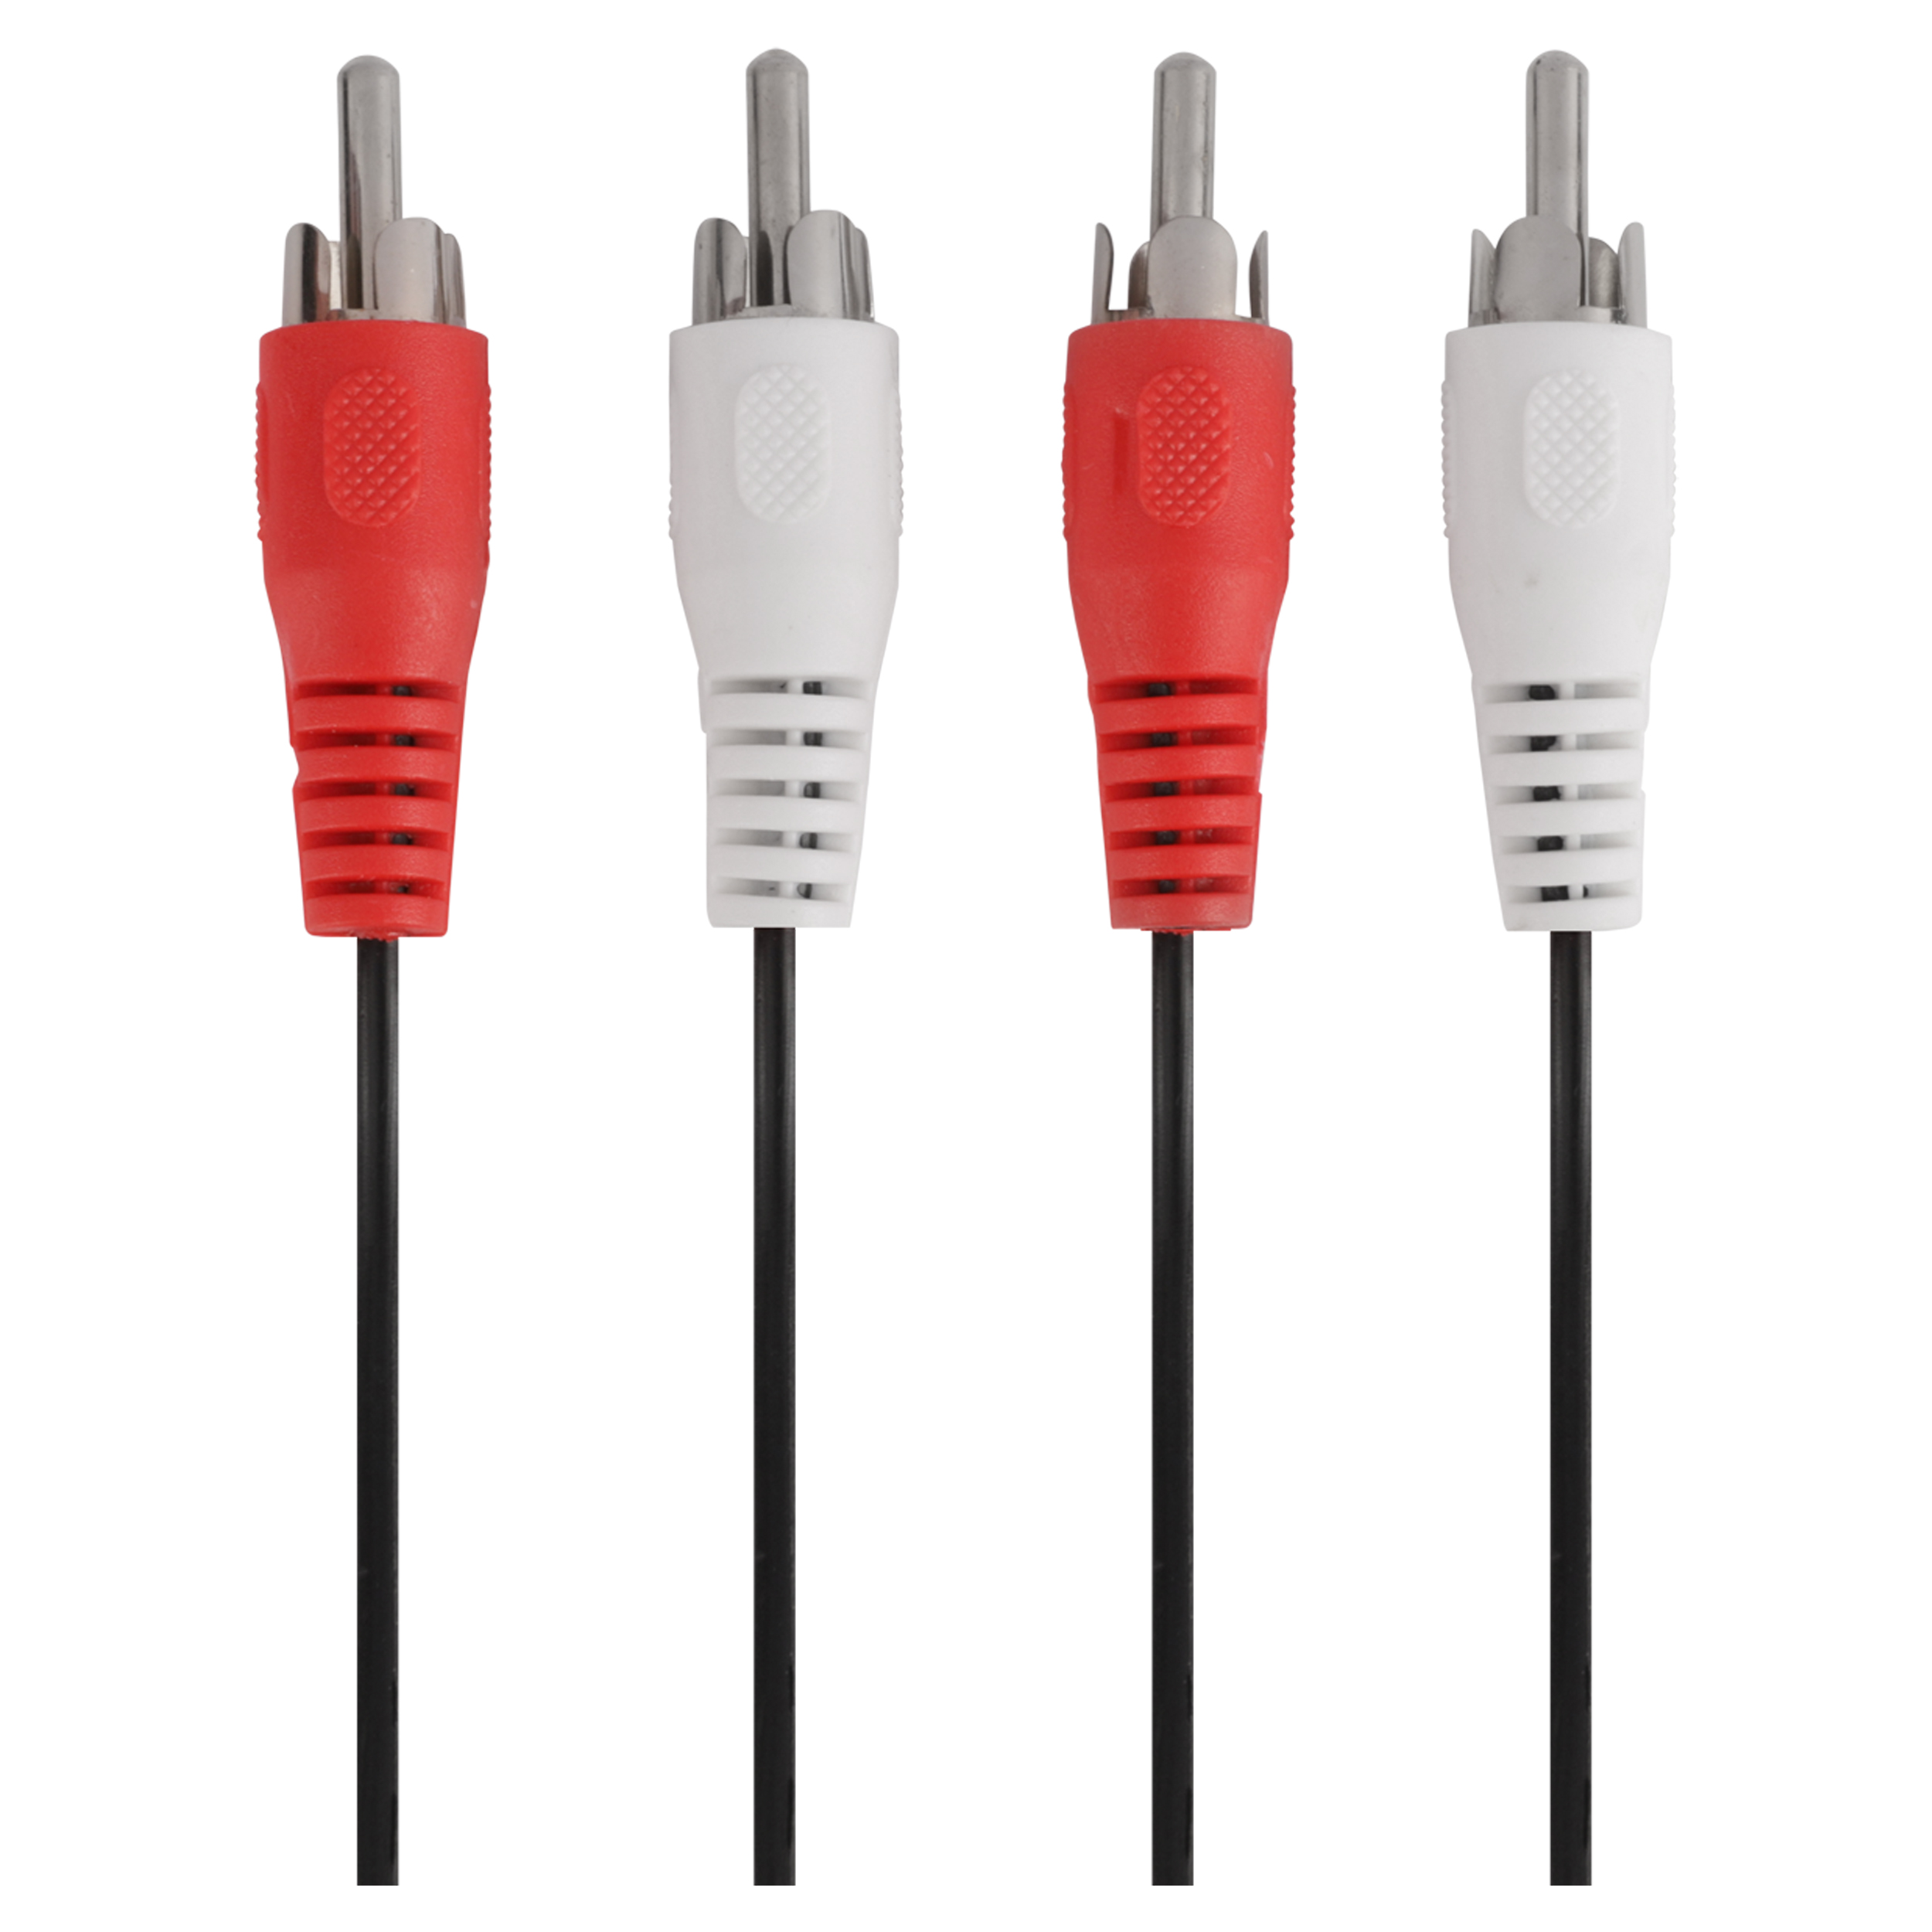 00.131.60 Q-Link  tulp kabel 2 RCA-male - 2 RCA-male - 1.5 m - rood-wit